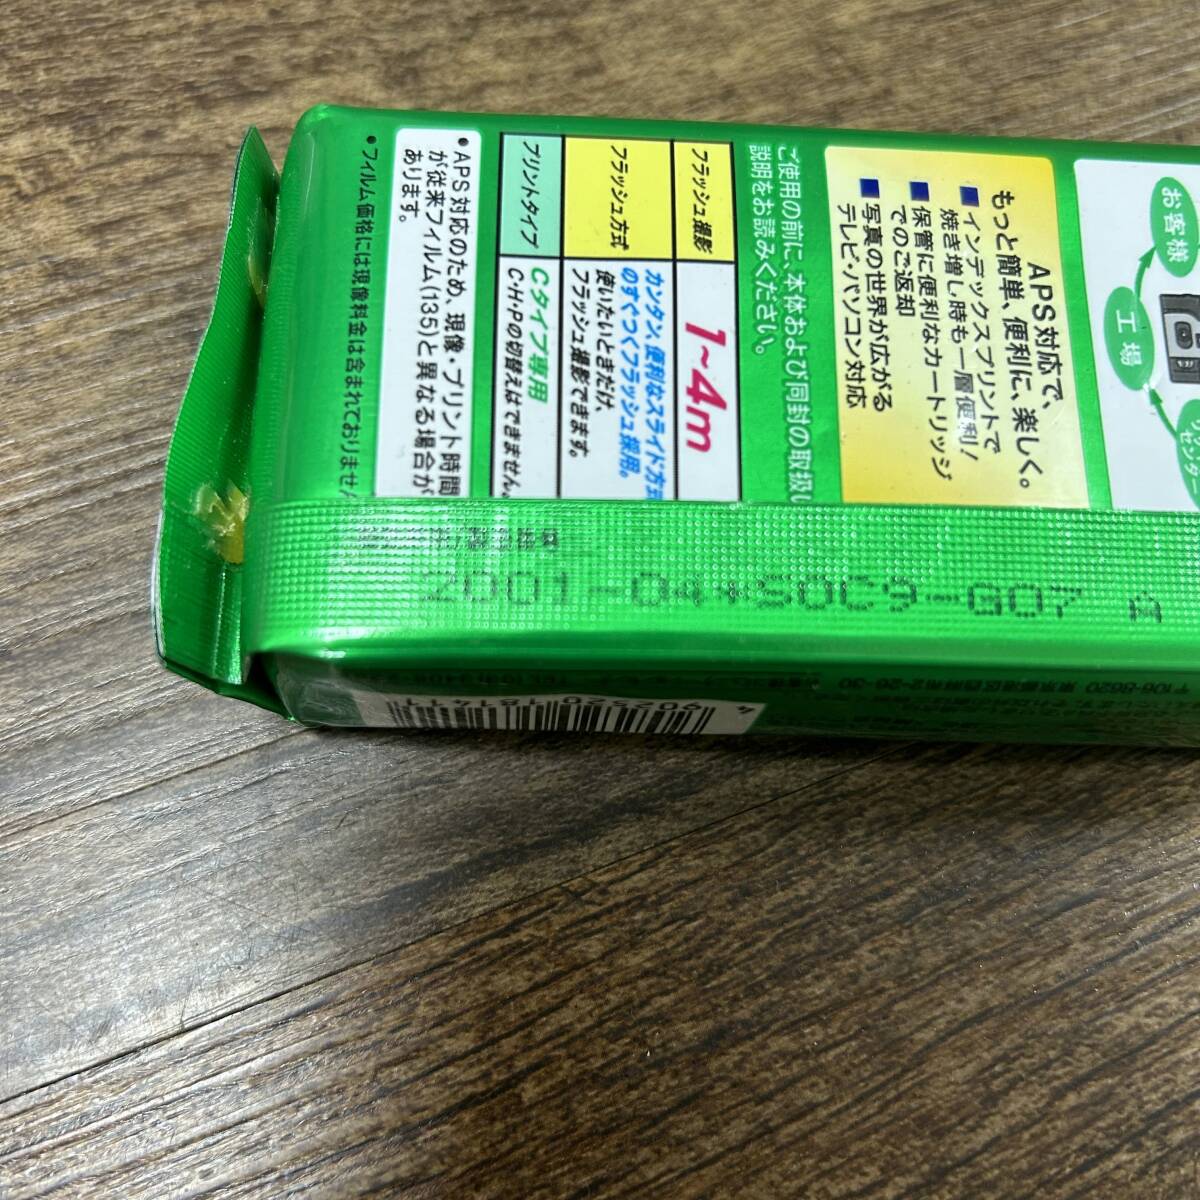 #.run. super slim Ace 25 sheets #..... Konica more MINI 24 sheets # unused goods expiration of a term disposable camera #